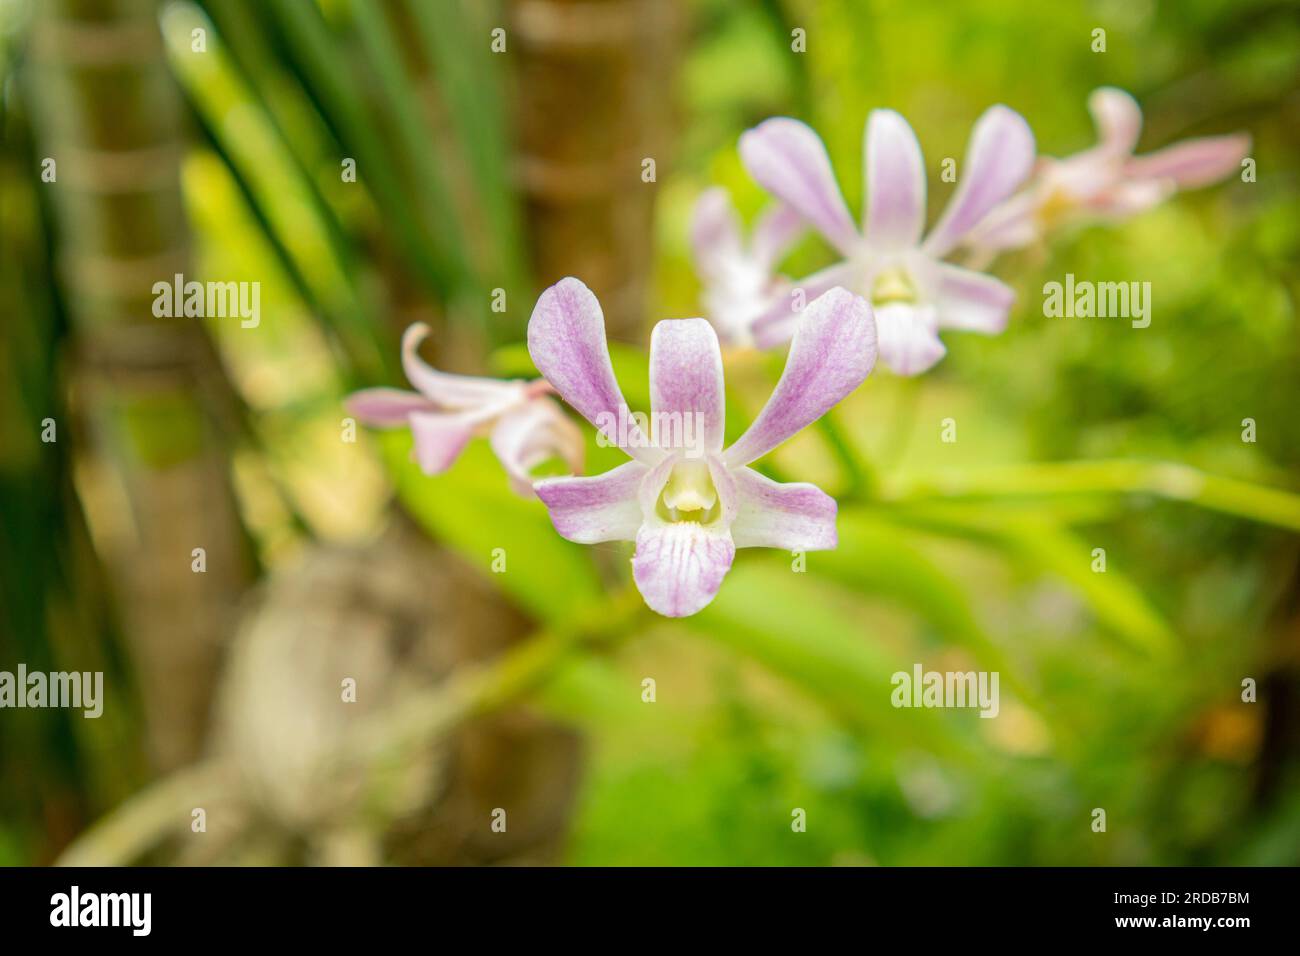 Beautiful purple dendrobium orchid flower in the garden, Stock Photo